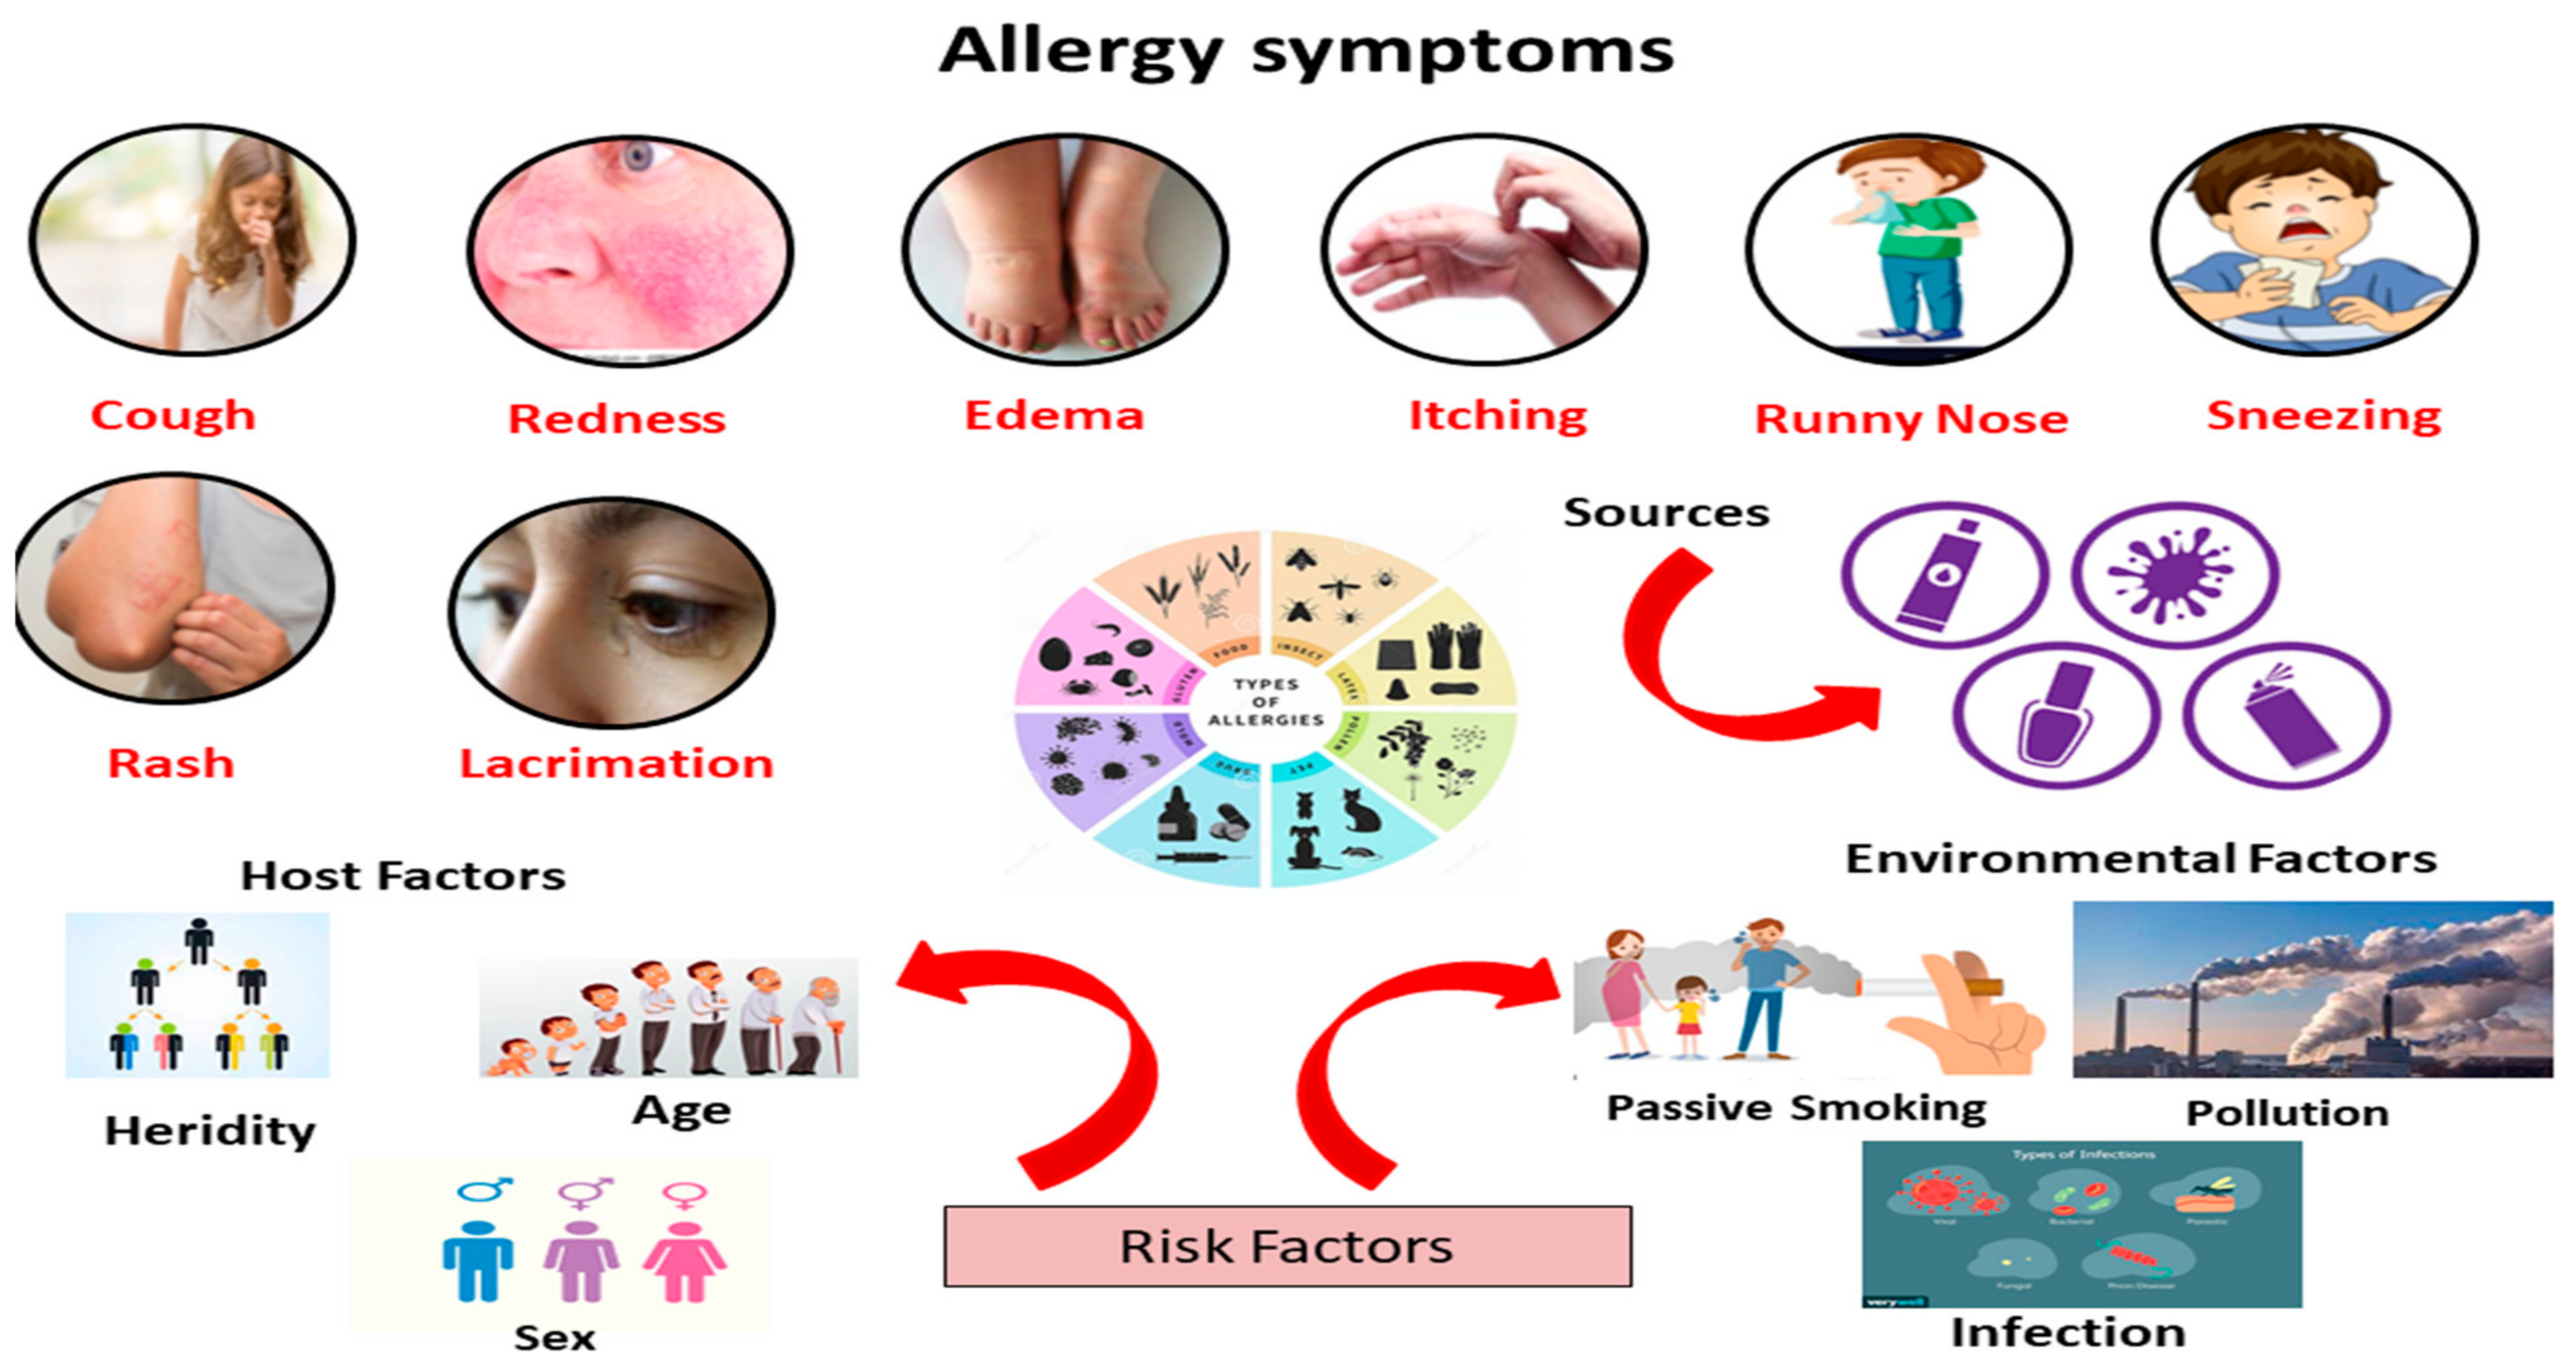 barrera diagonal caridad IJERPH | Free Full-Text | Allergic Diseases: A Comprehensive Review on Risk  Factors, Immunological Mechanisms, Link with COVID-19, Potential  Treatments, and Role of Allergen Bioinformatics